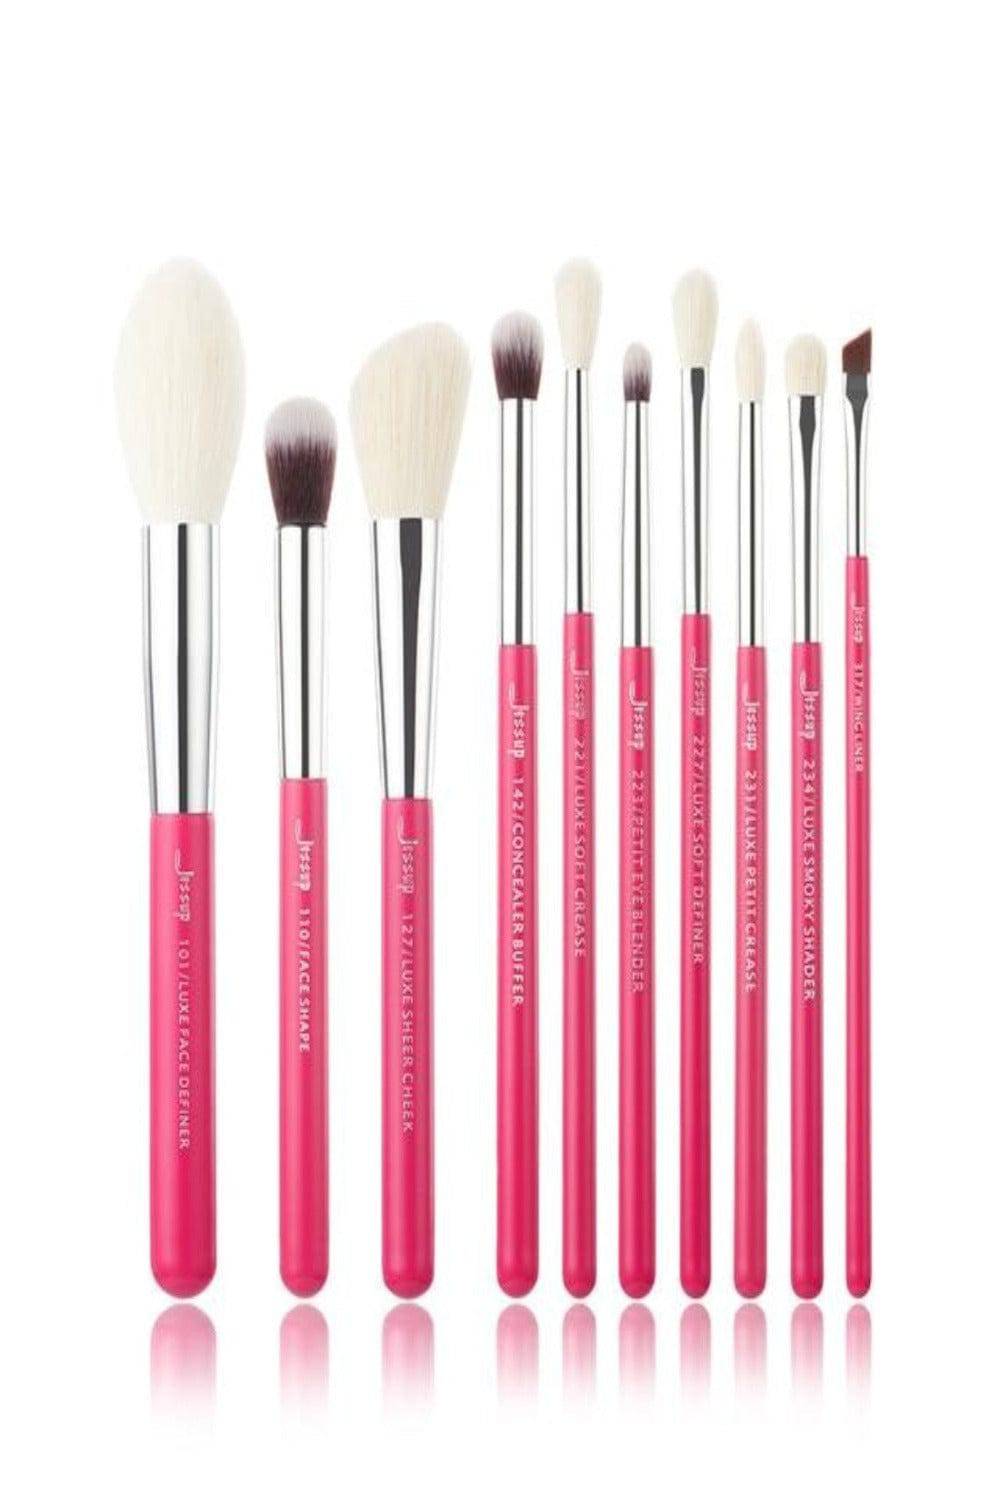 Girls On The Go White Professional Makeup Brush Set - 10 Pack - TGC Boutique - Makeup Brushes